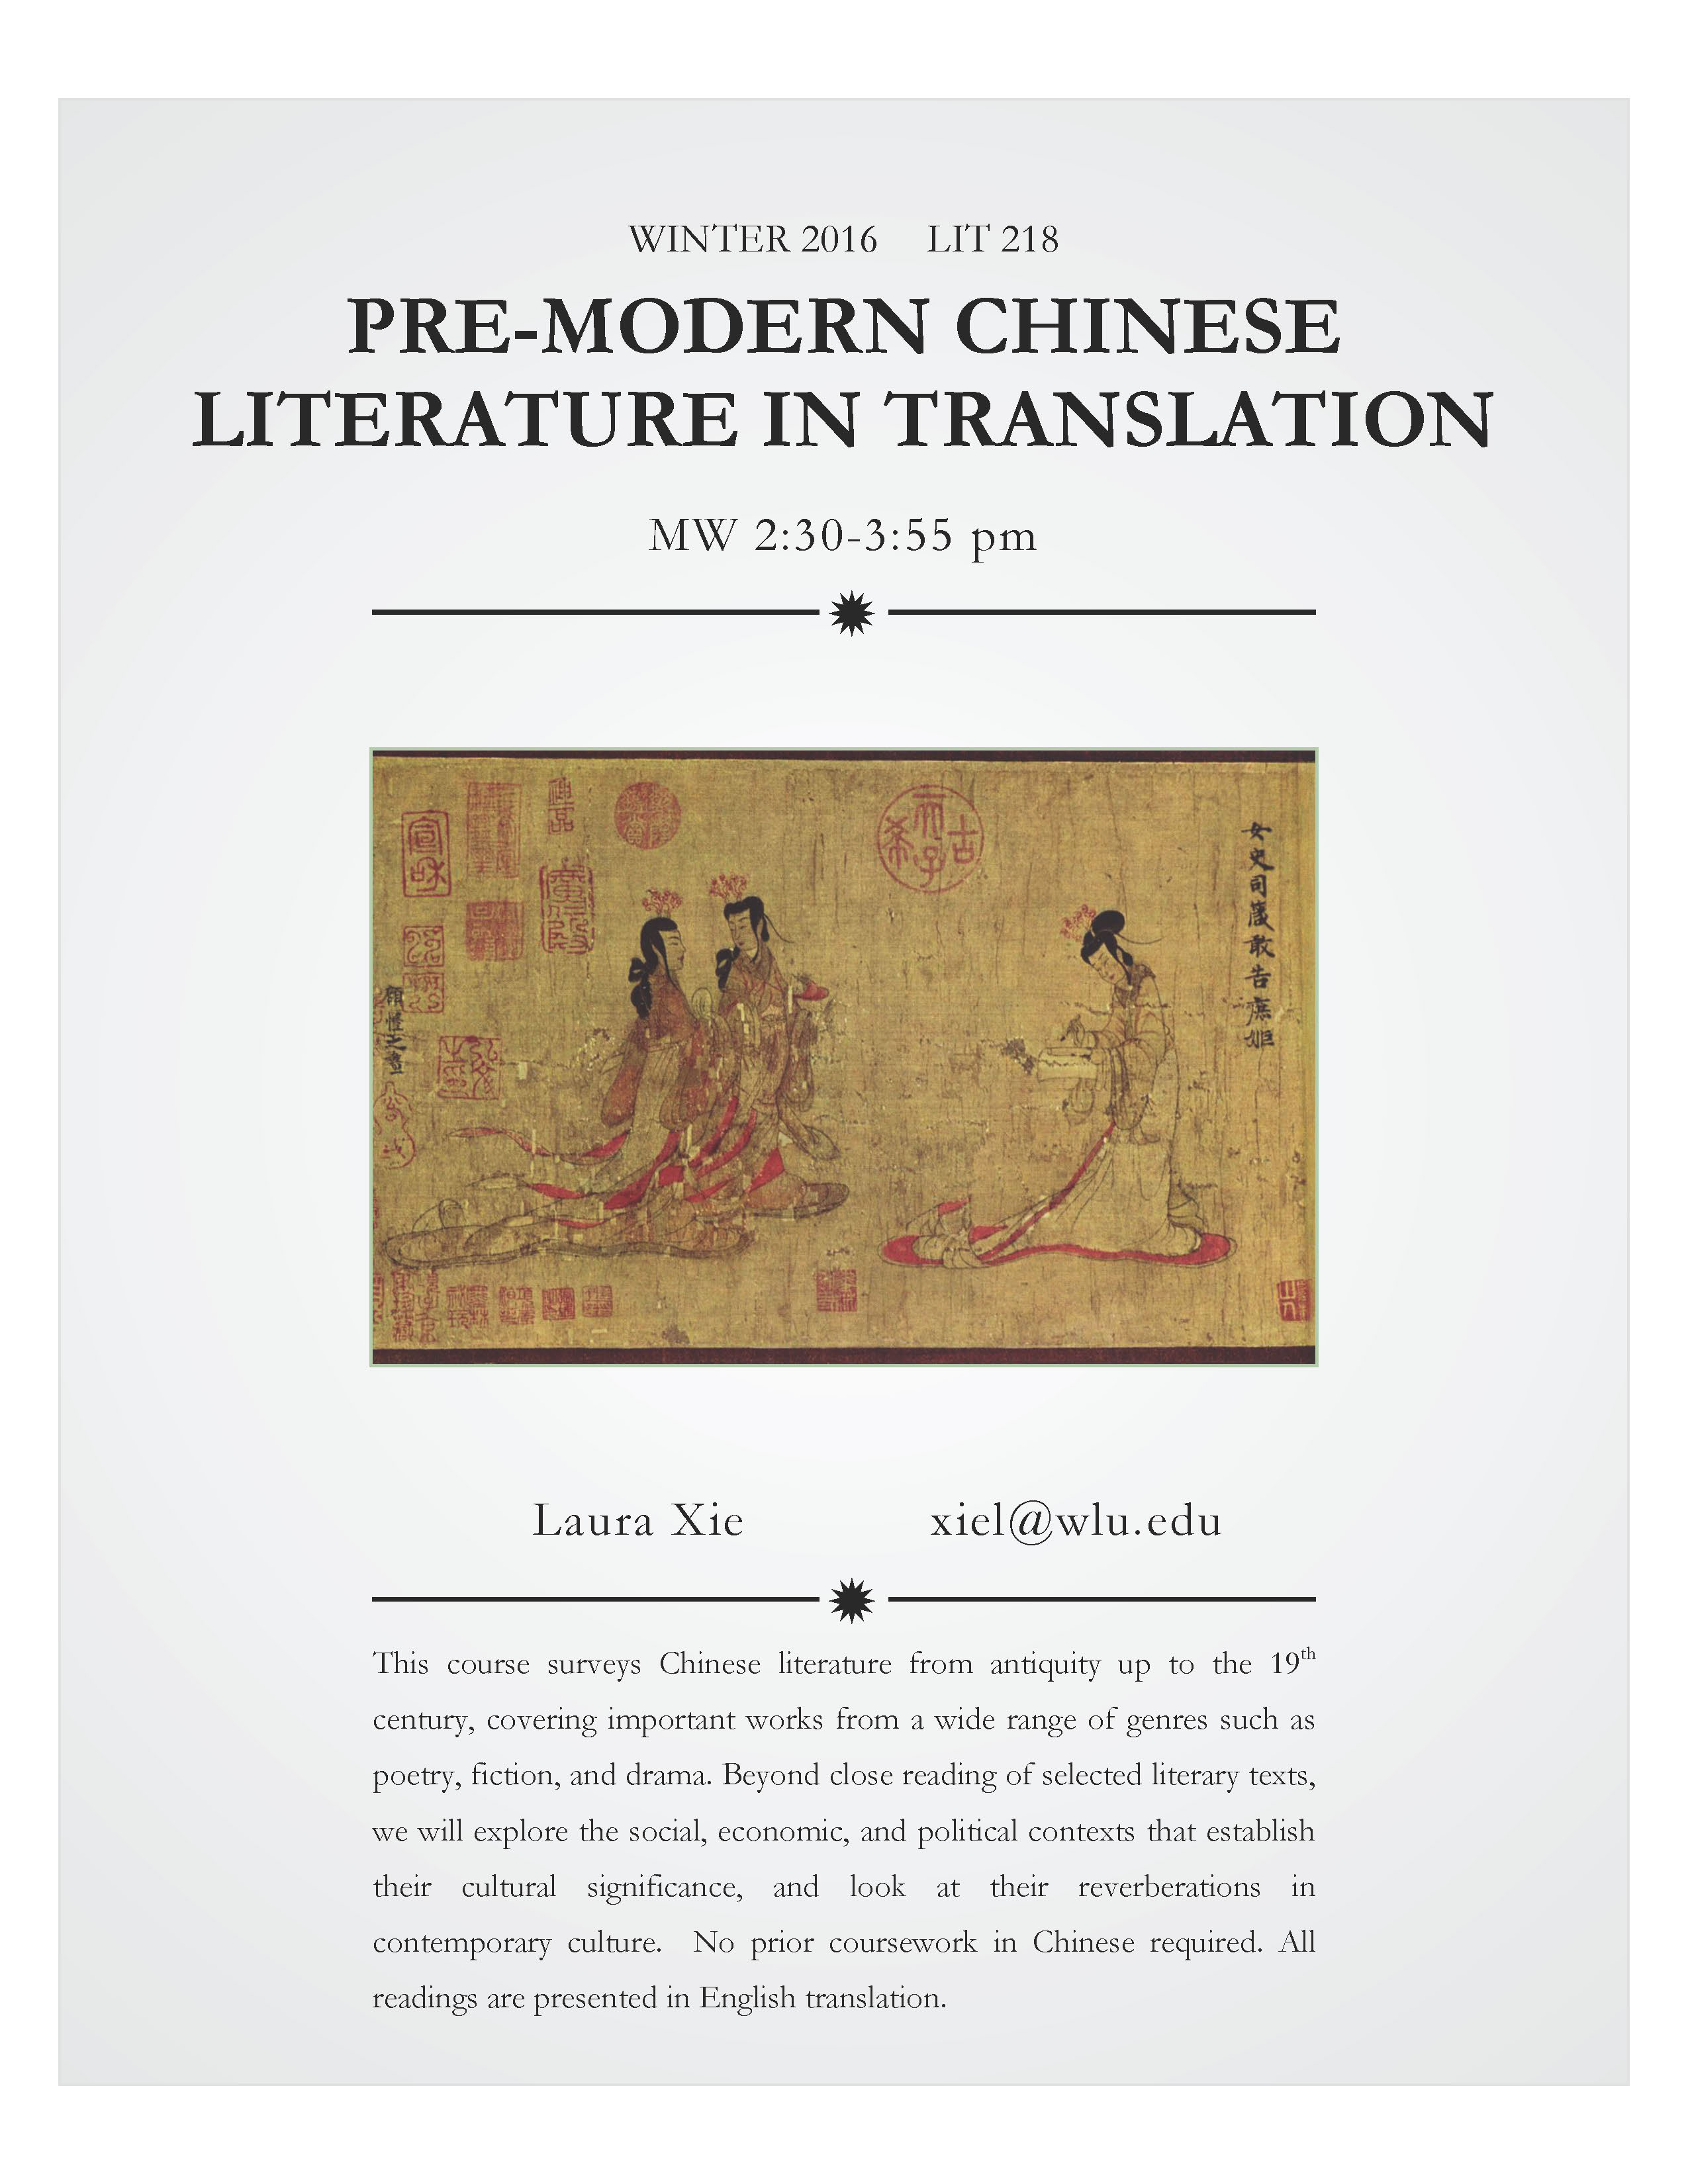 Chinese literature from antiquity up to the 19th century, covering important works from a wide range of genres such as poetry, fiction, and drama